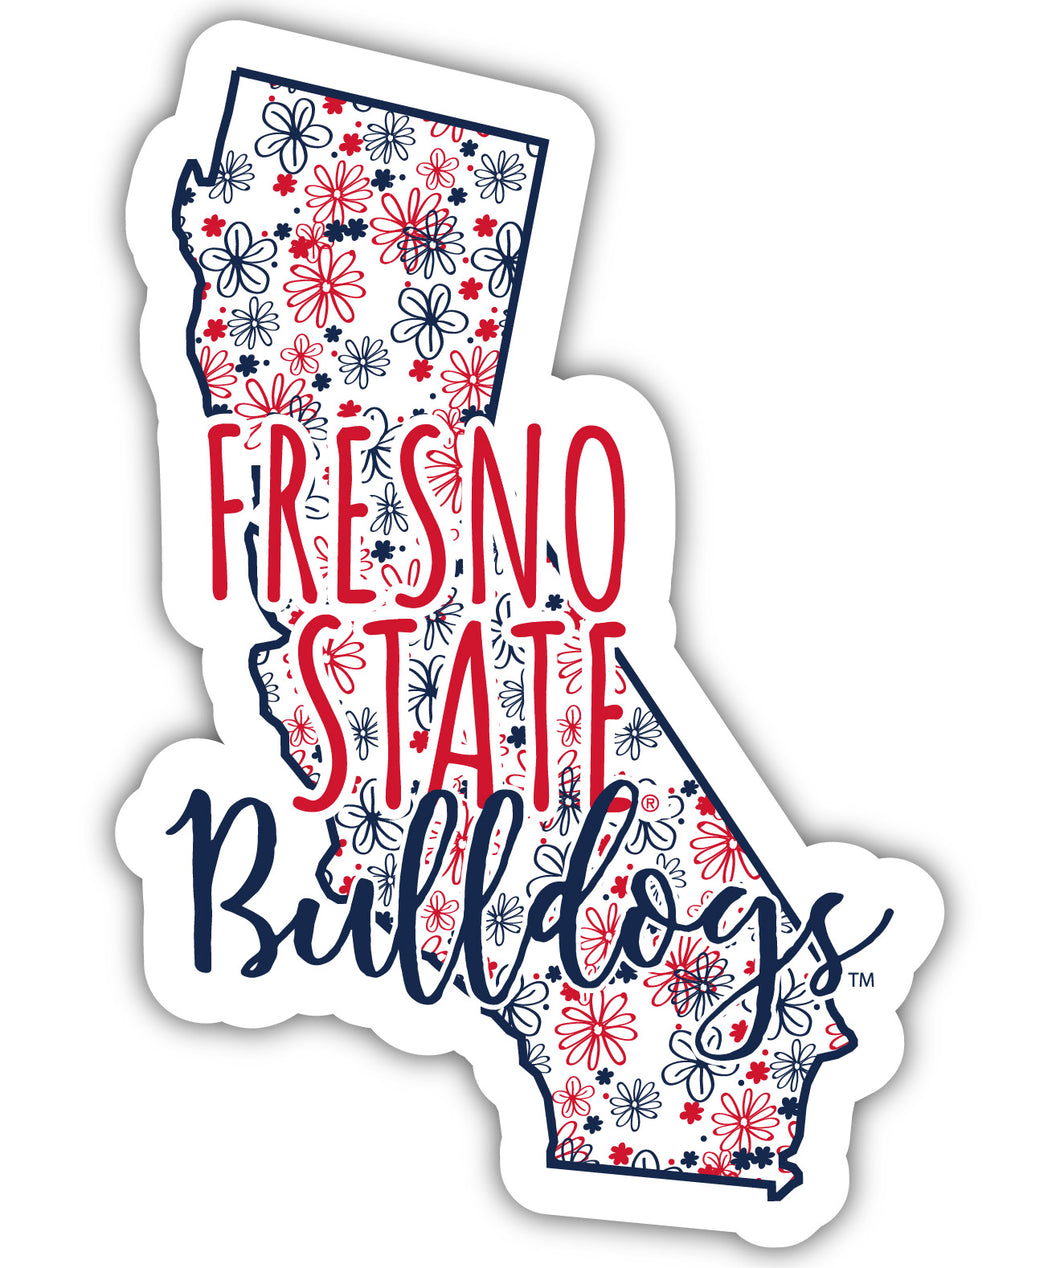 Fresno State Bulldogs 2-Inch on one of its sides Floral Design NCAA Floral Love Vinyl Sticker - Blossoming School Spirit Decal Sticker